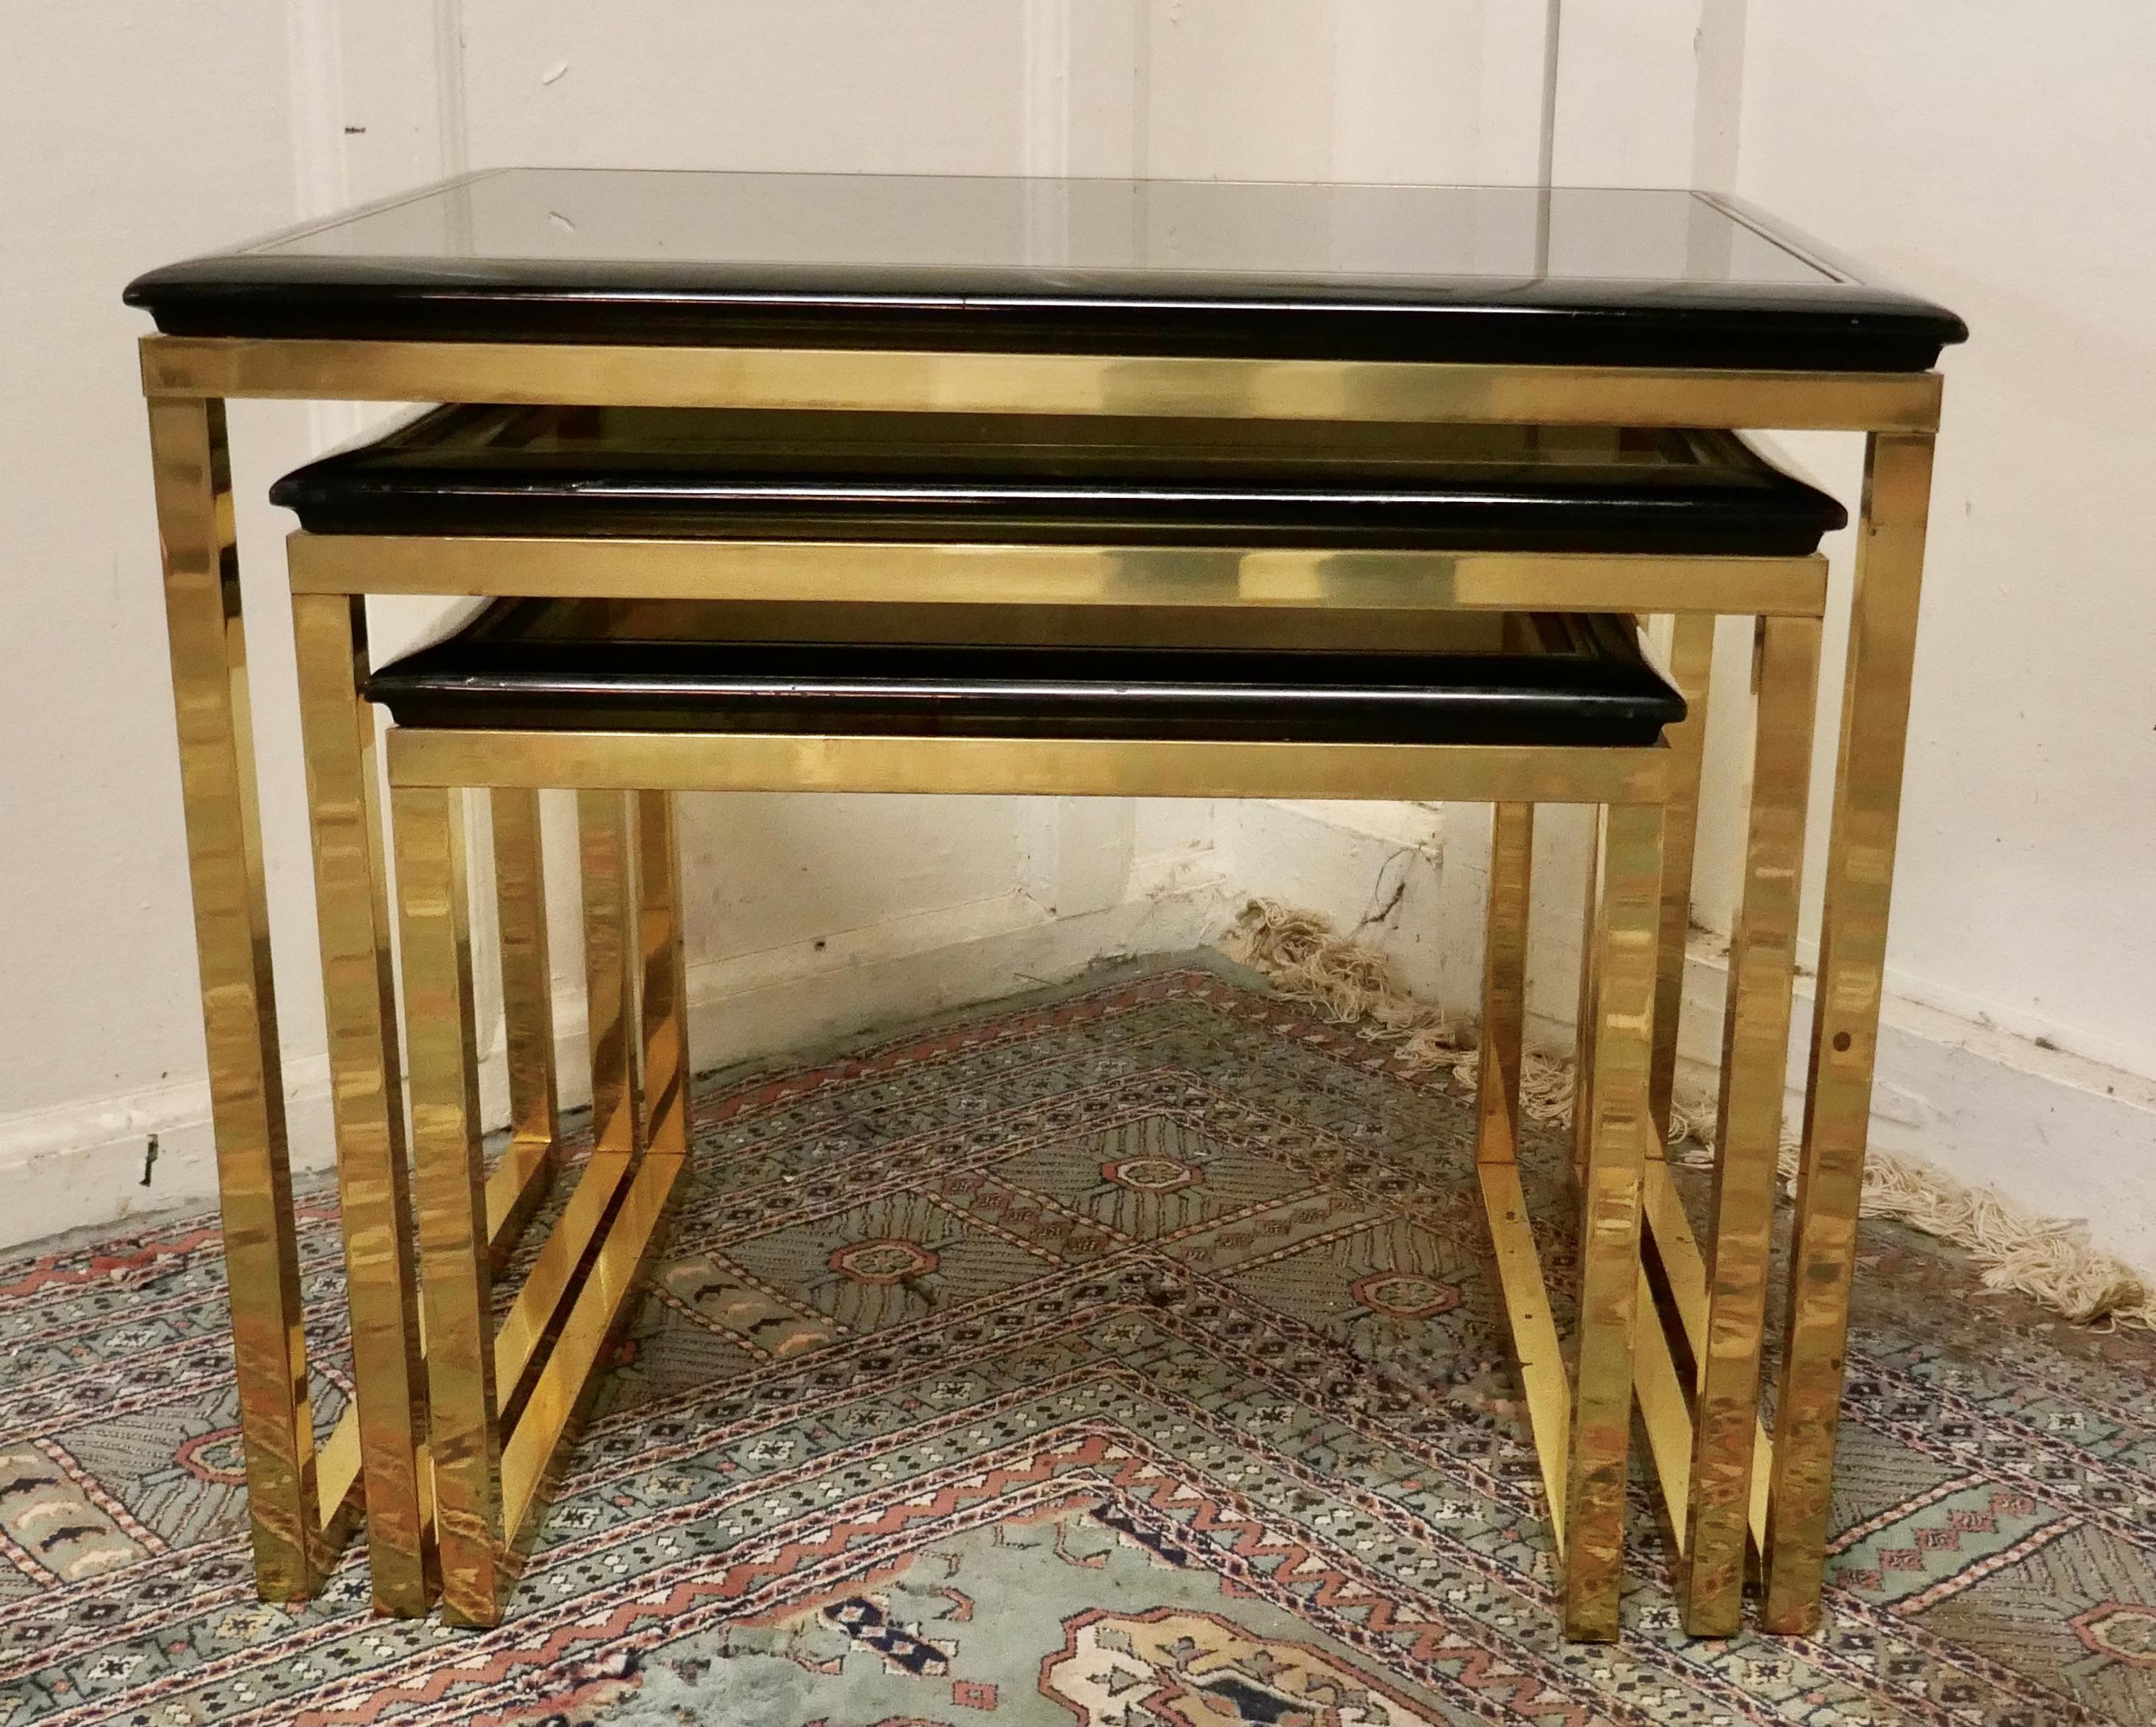 French Art Deco smoked glass & brass nest of tables

This is a very stylish good-looking set of tables, they have smoked glass table tops set on Black and Brass coloured metal frames
The tables are sound and in good condition, as with all Nests